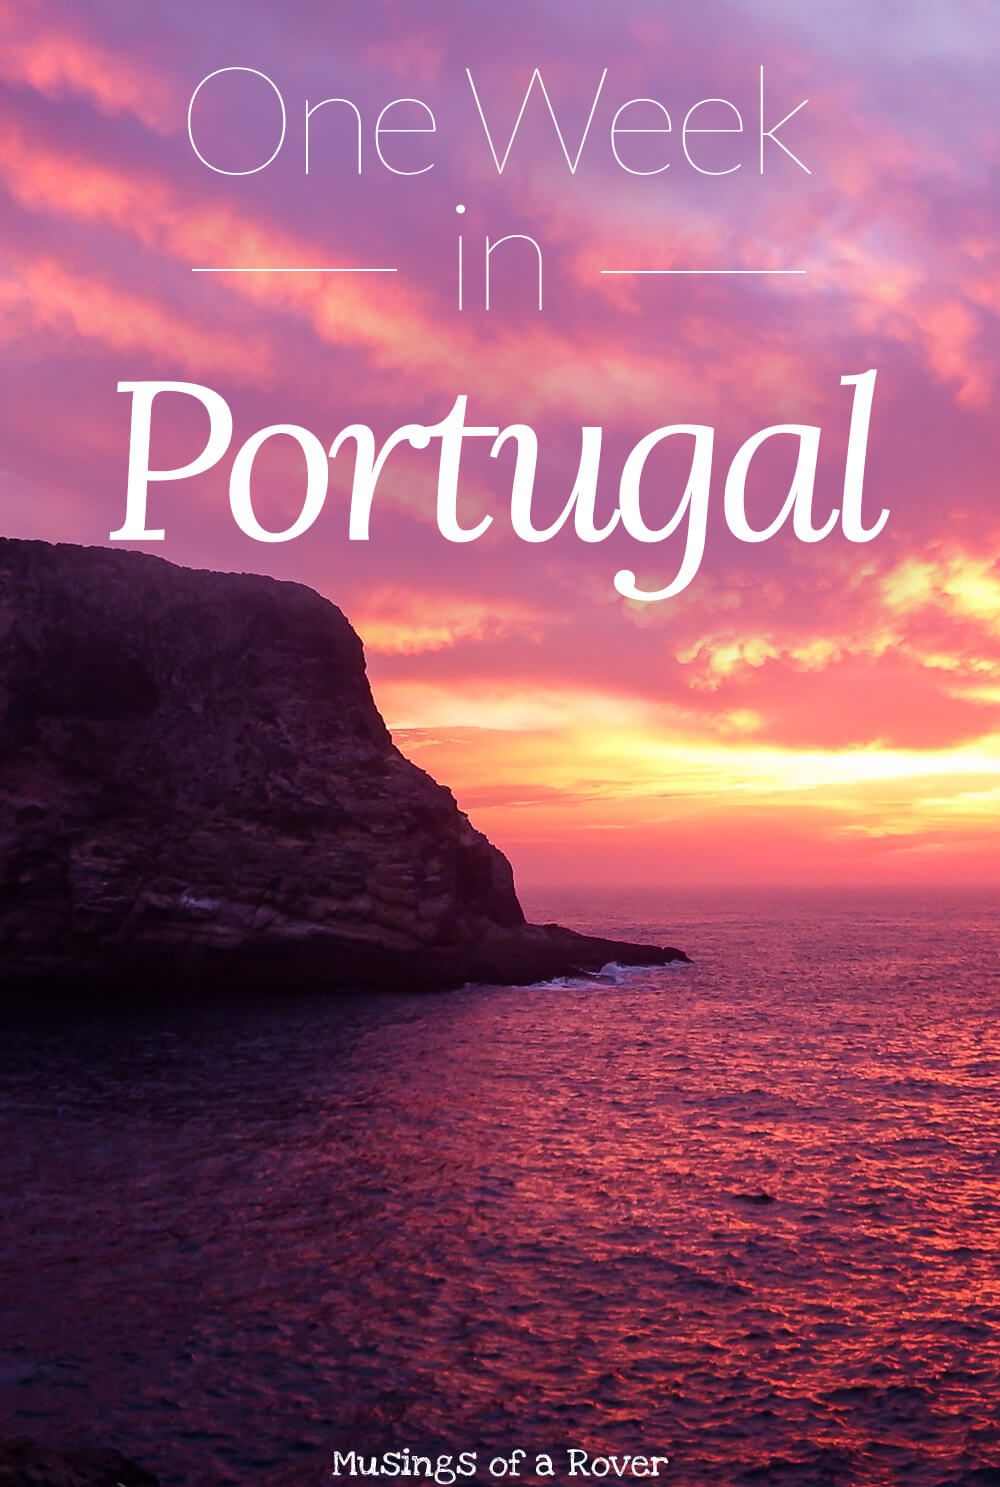 For a small country, Portugal has a lot: castles, beaches, hiking, and more. But where to start? Here's a Portugal Itinerary that's packed with everything you need to see in Lagos, Lisbon, Sintra, and Porto.